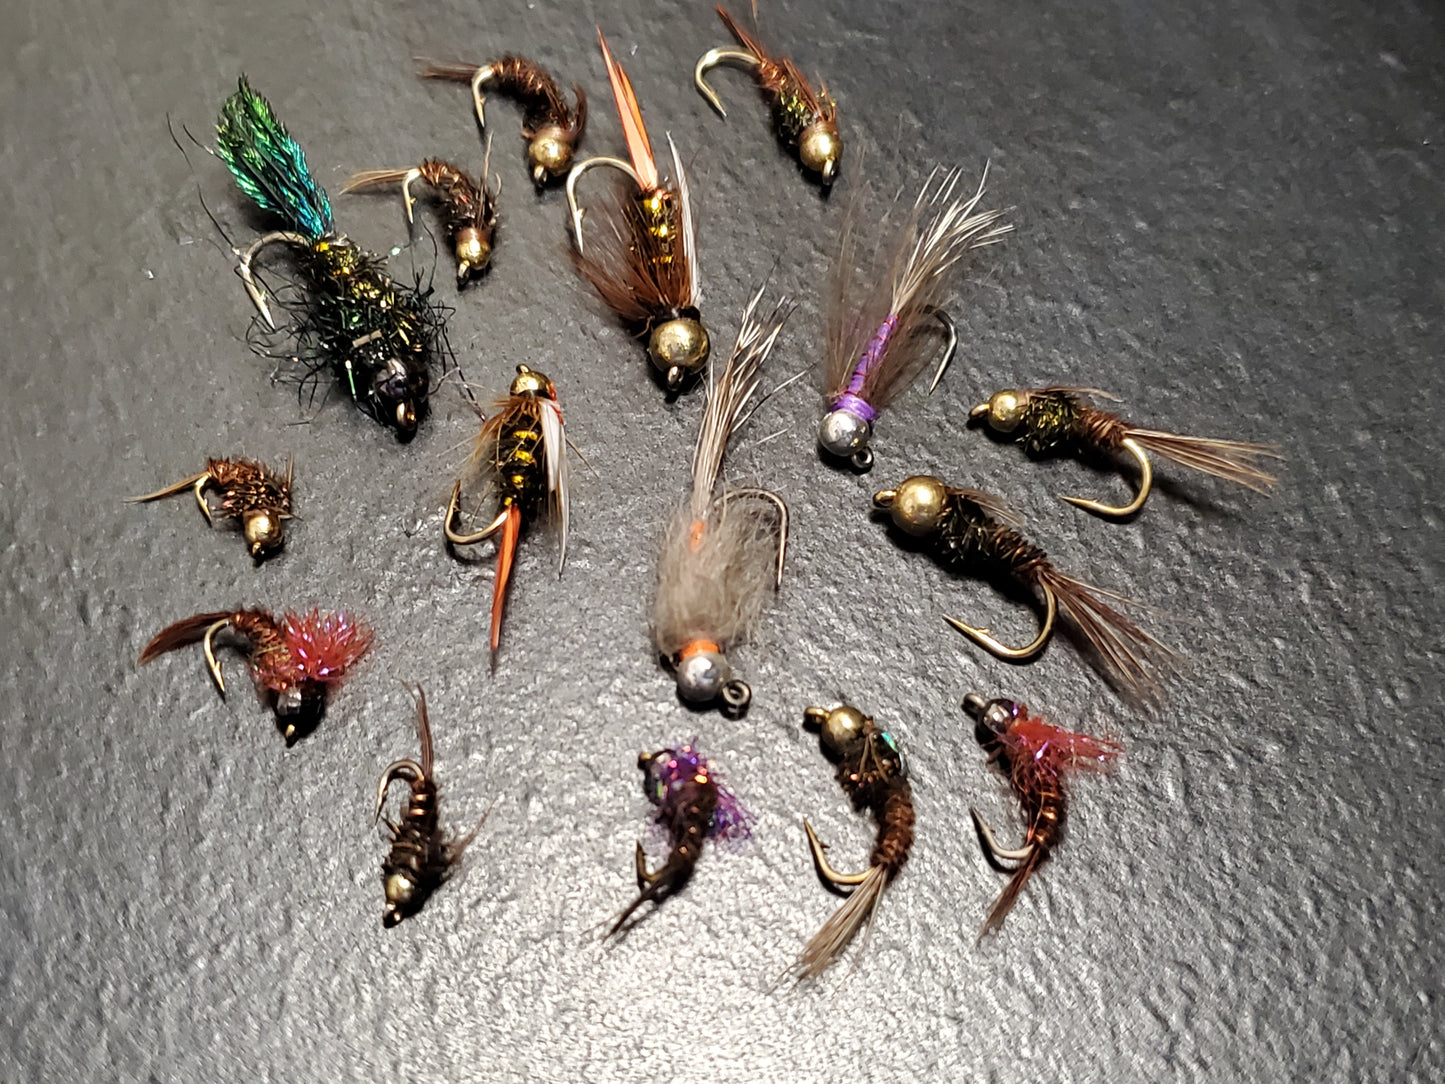 Tungsten Bead Head Trout Selection 16 Fly Selection, Bead Head nymph, BH Nymp